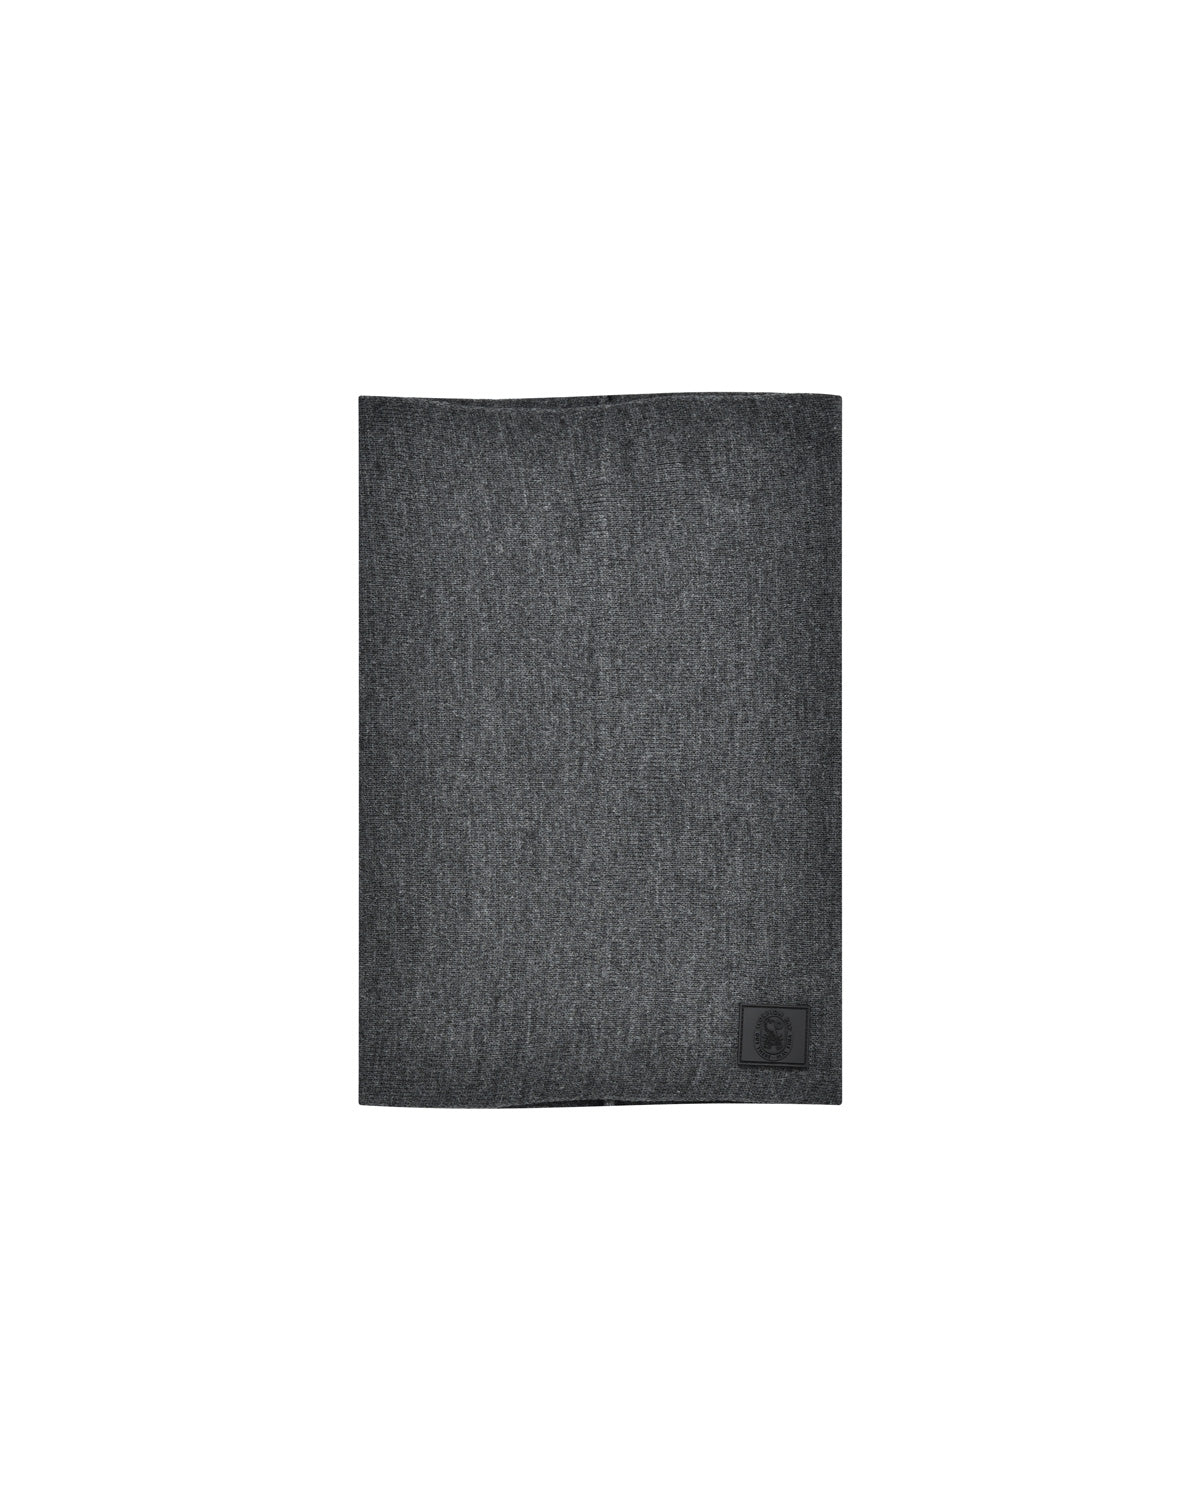 Gray stockinette knit neck warmer with logo patch